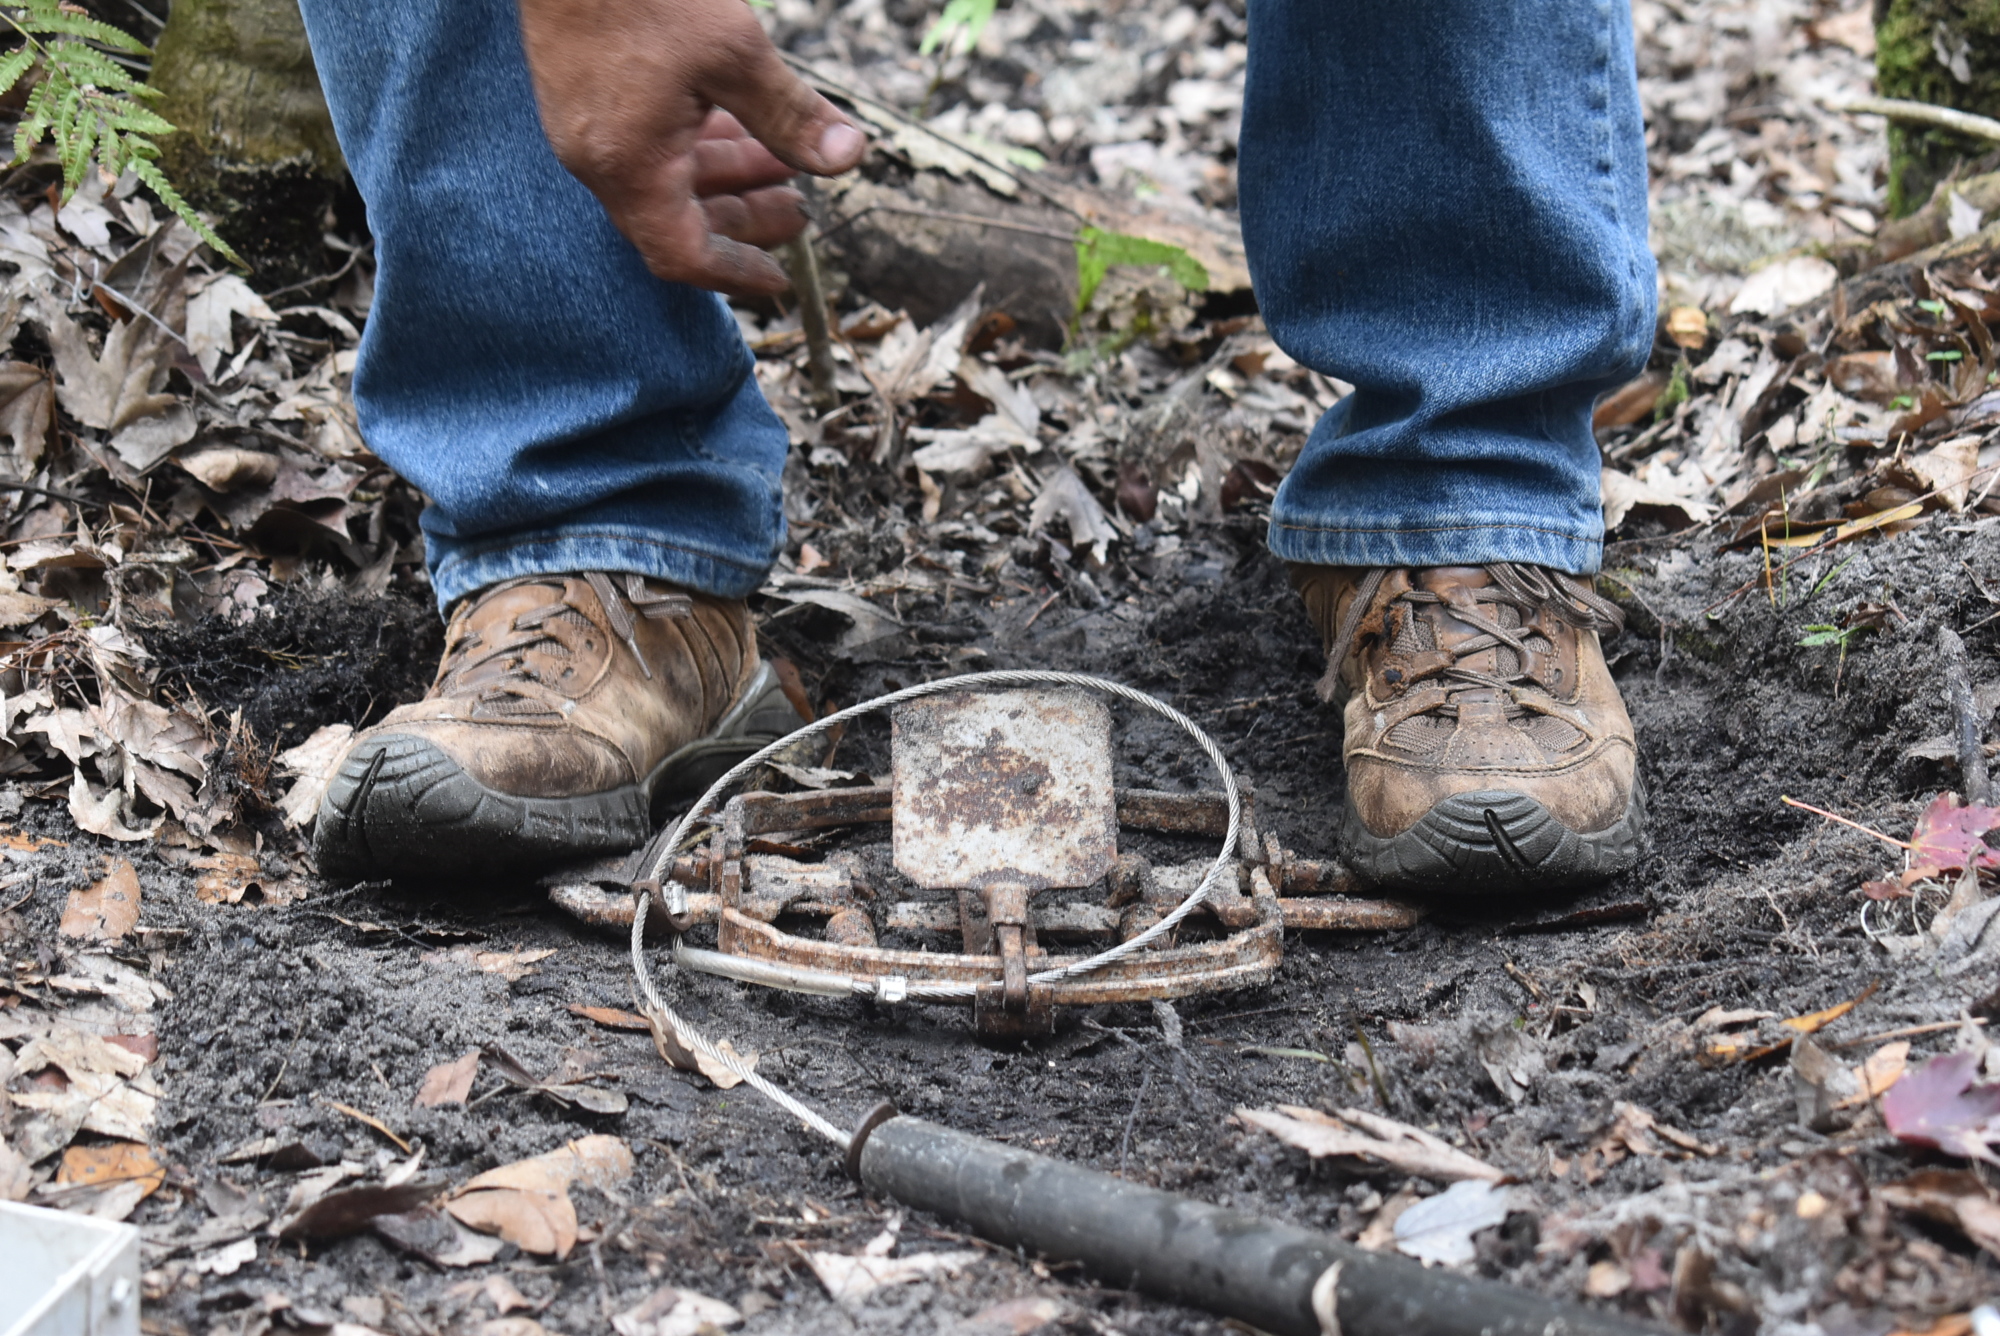 Juan Trevino sets up a power snare trap, one of five he plans on using in Lakewood Ranch.